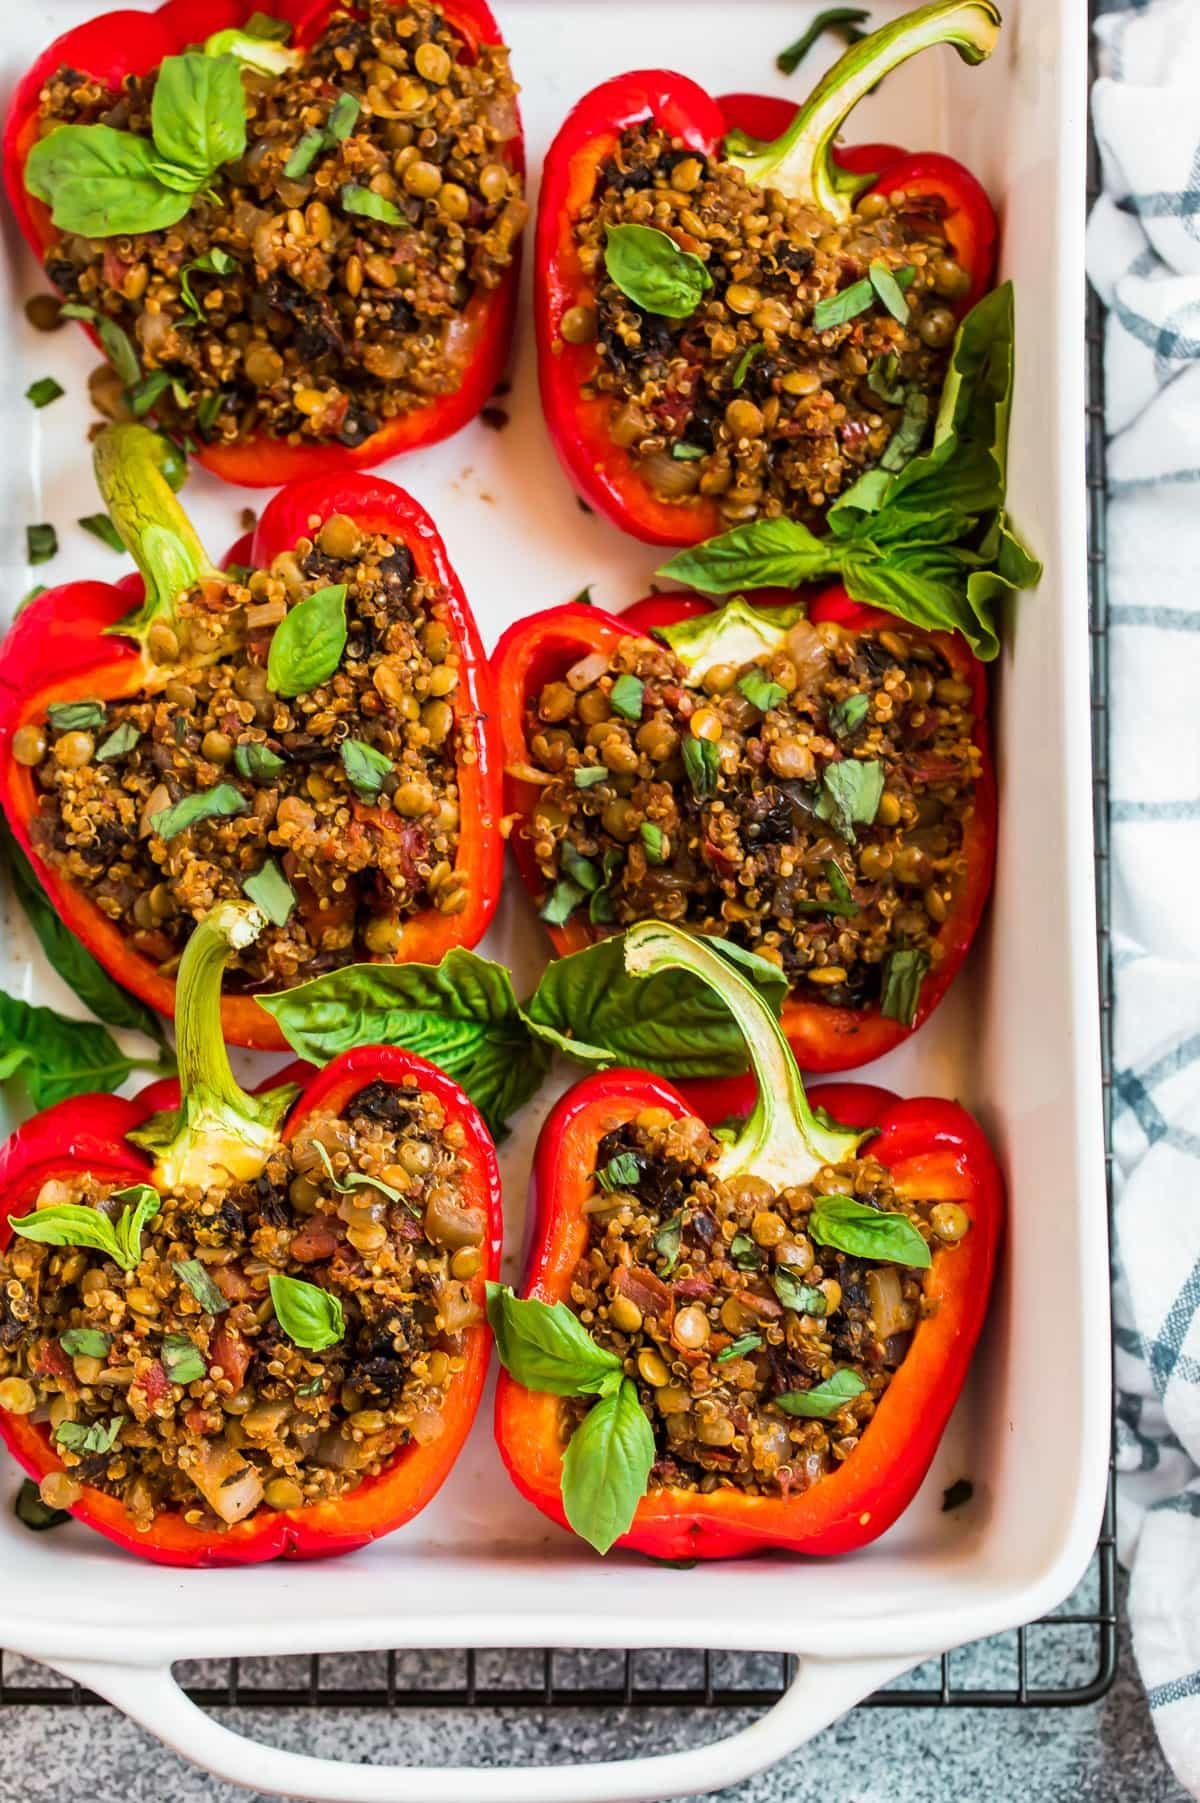 How to Make Delicious and Easy Vegetarian Stuffed Peppers in Just 30 Minutes